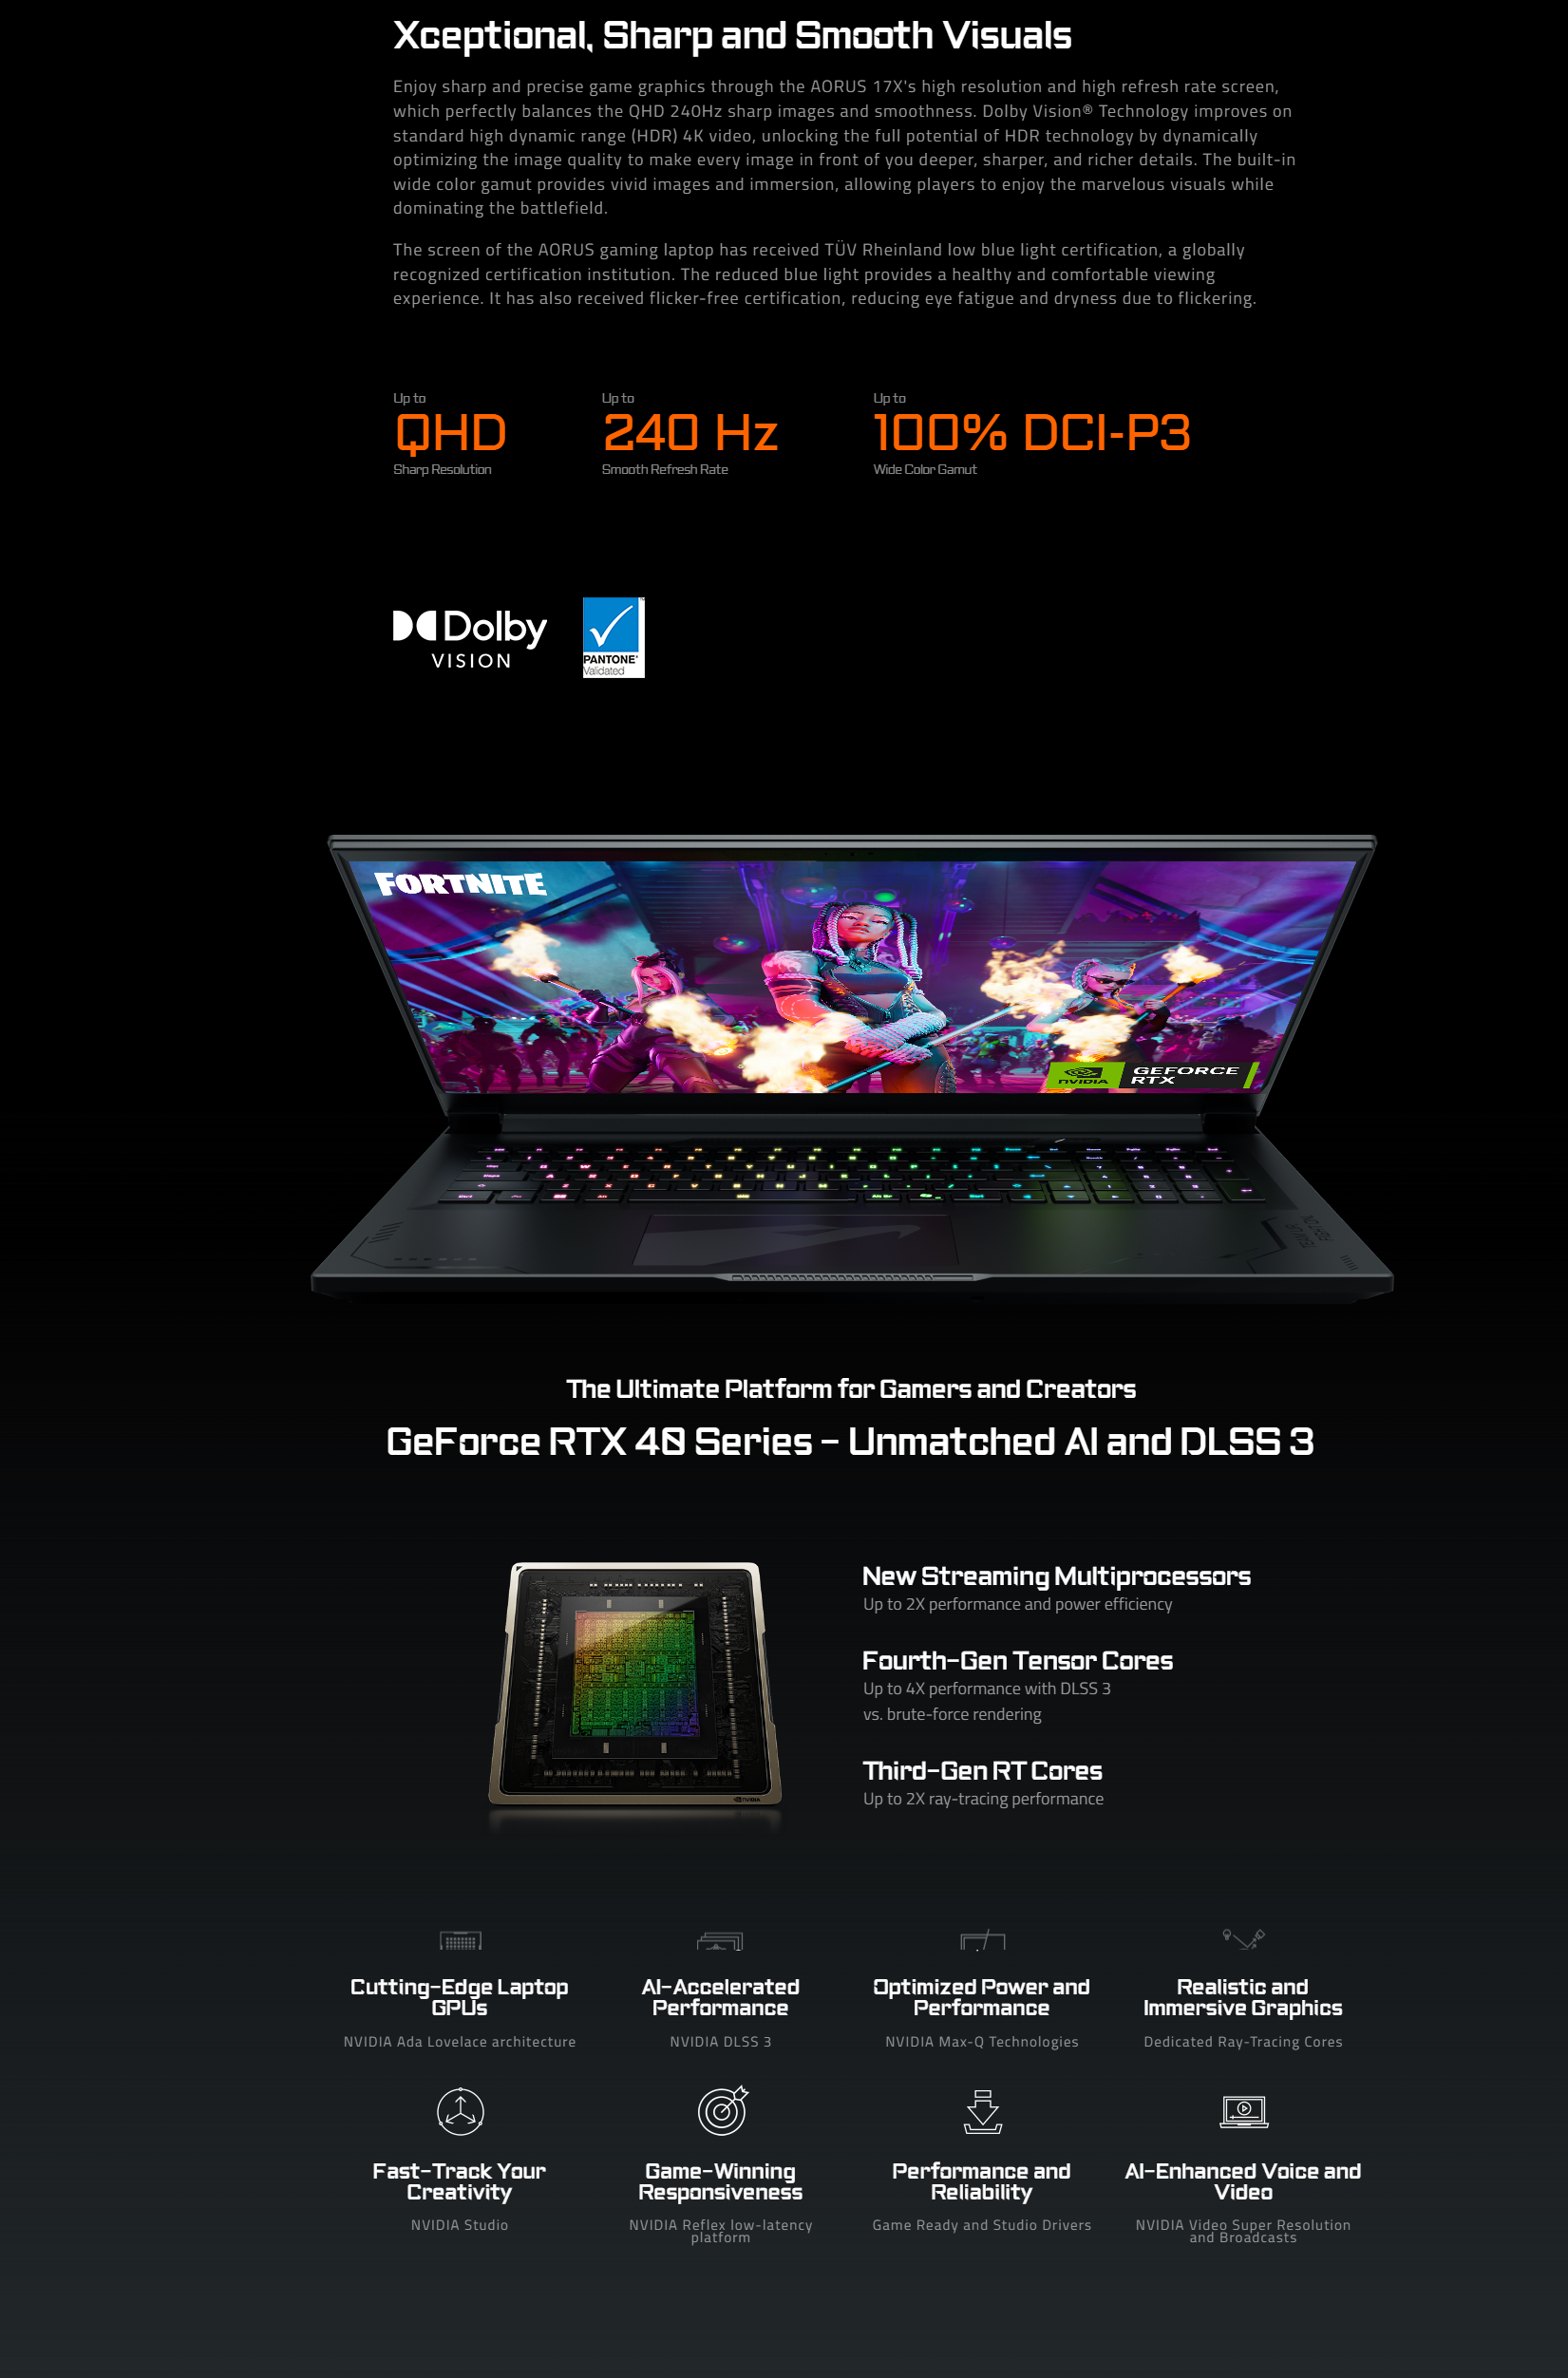 A large marketing image providing additional information about the product Gigabyte AORUS 17X AZG-65AU665SH 17.3" 240Hz 14th Gen i9 14900HX RTX 4090 Win 11 Gaming Notebook - Additional alt info not provided